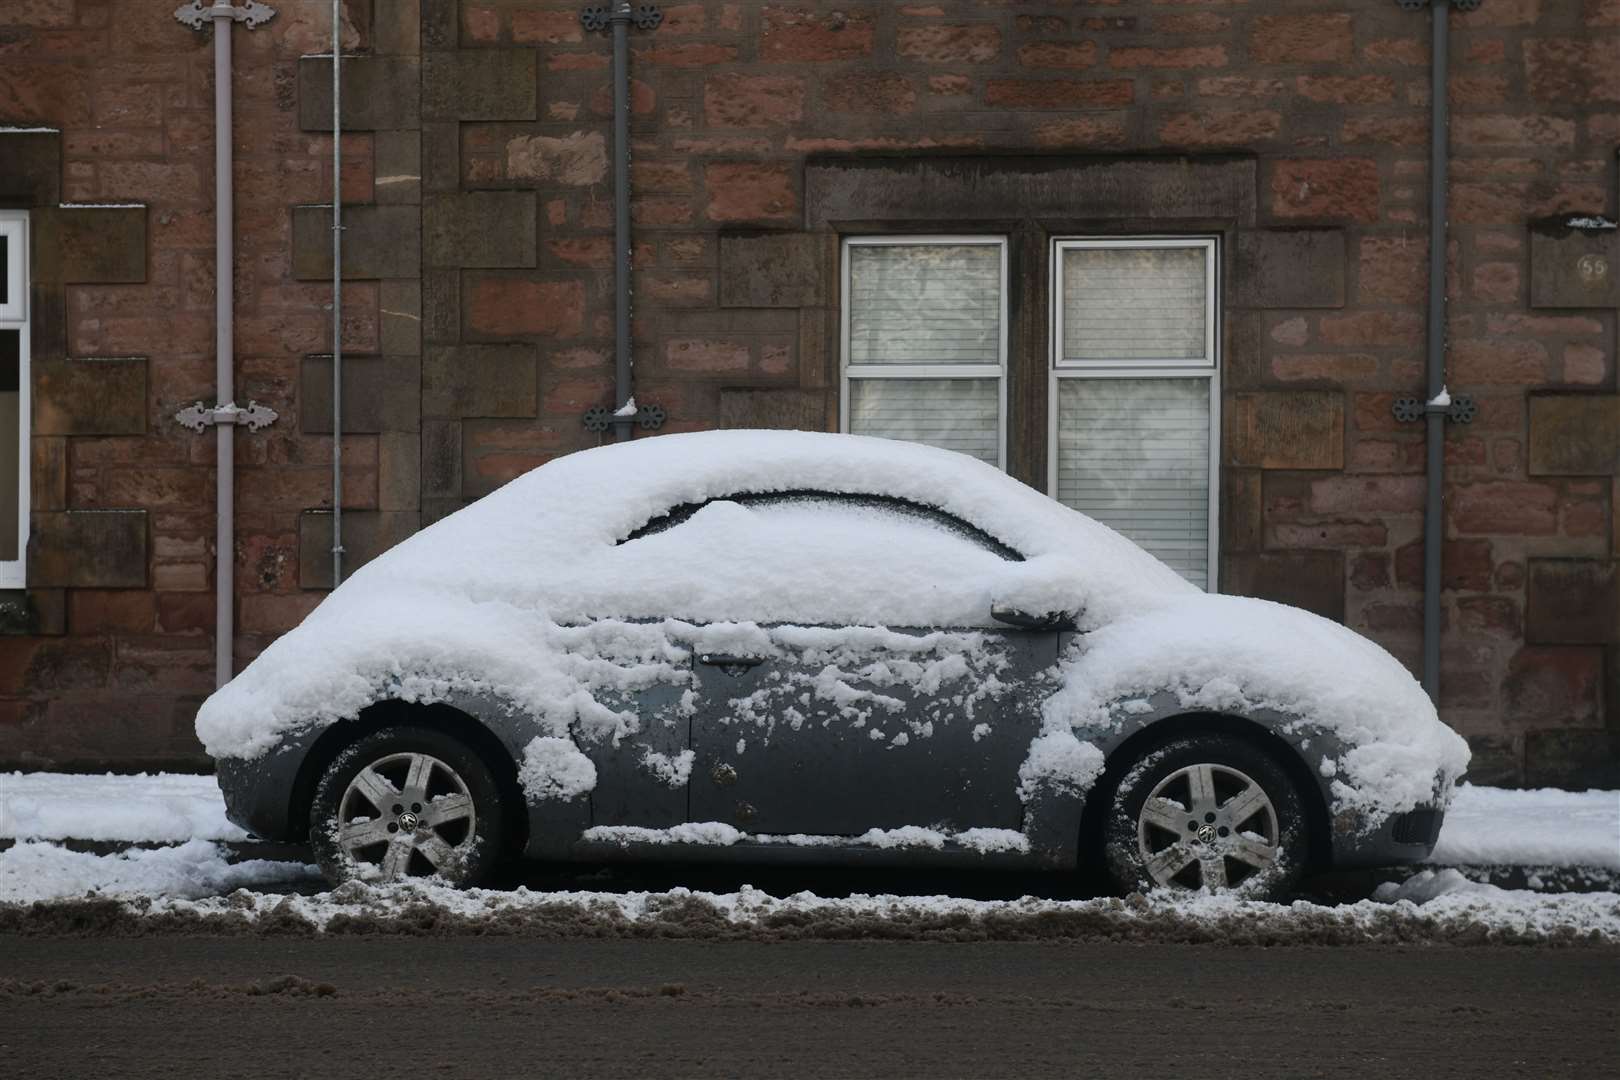 A VW Beetle in the snow. Picture: James Mackenzie